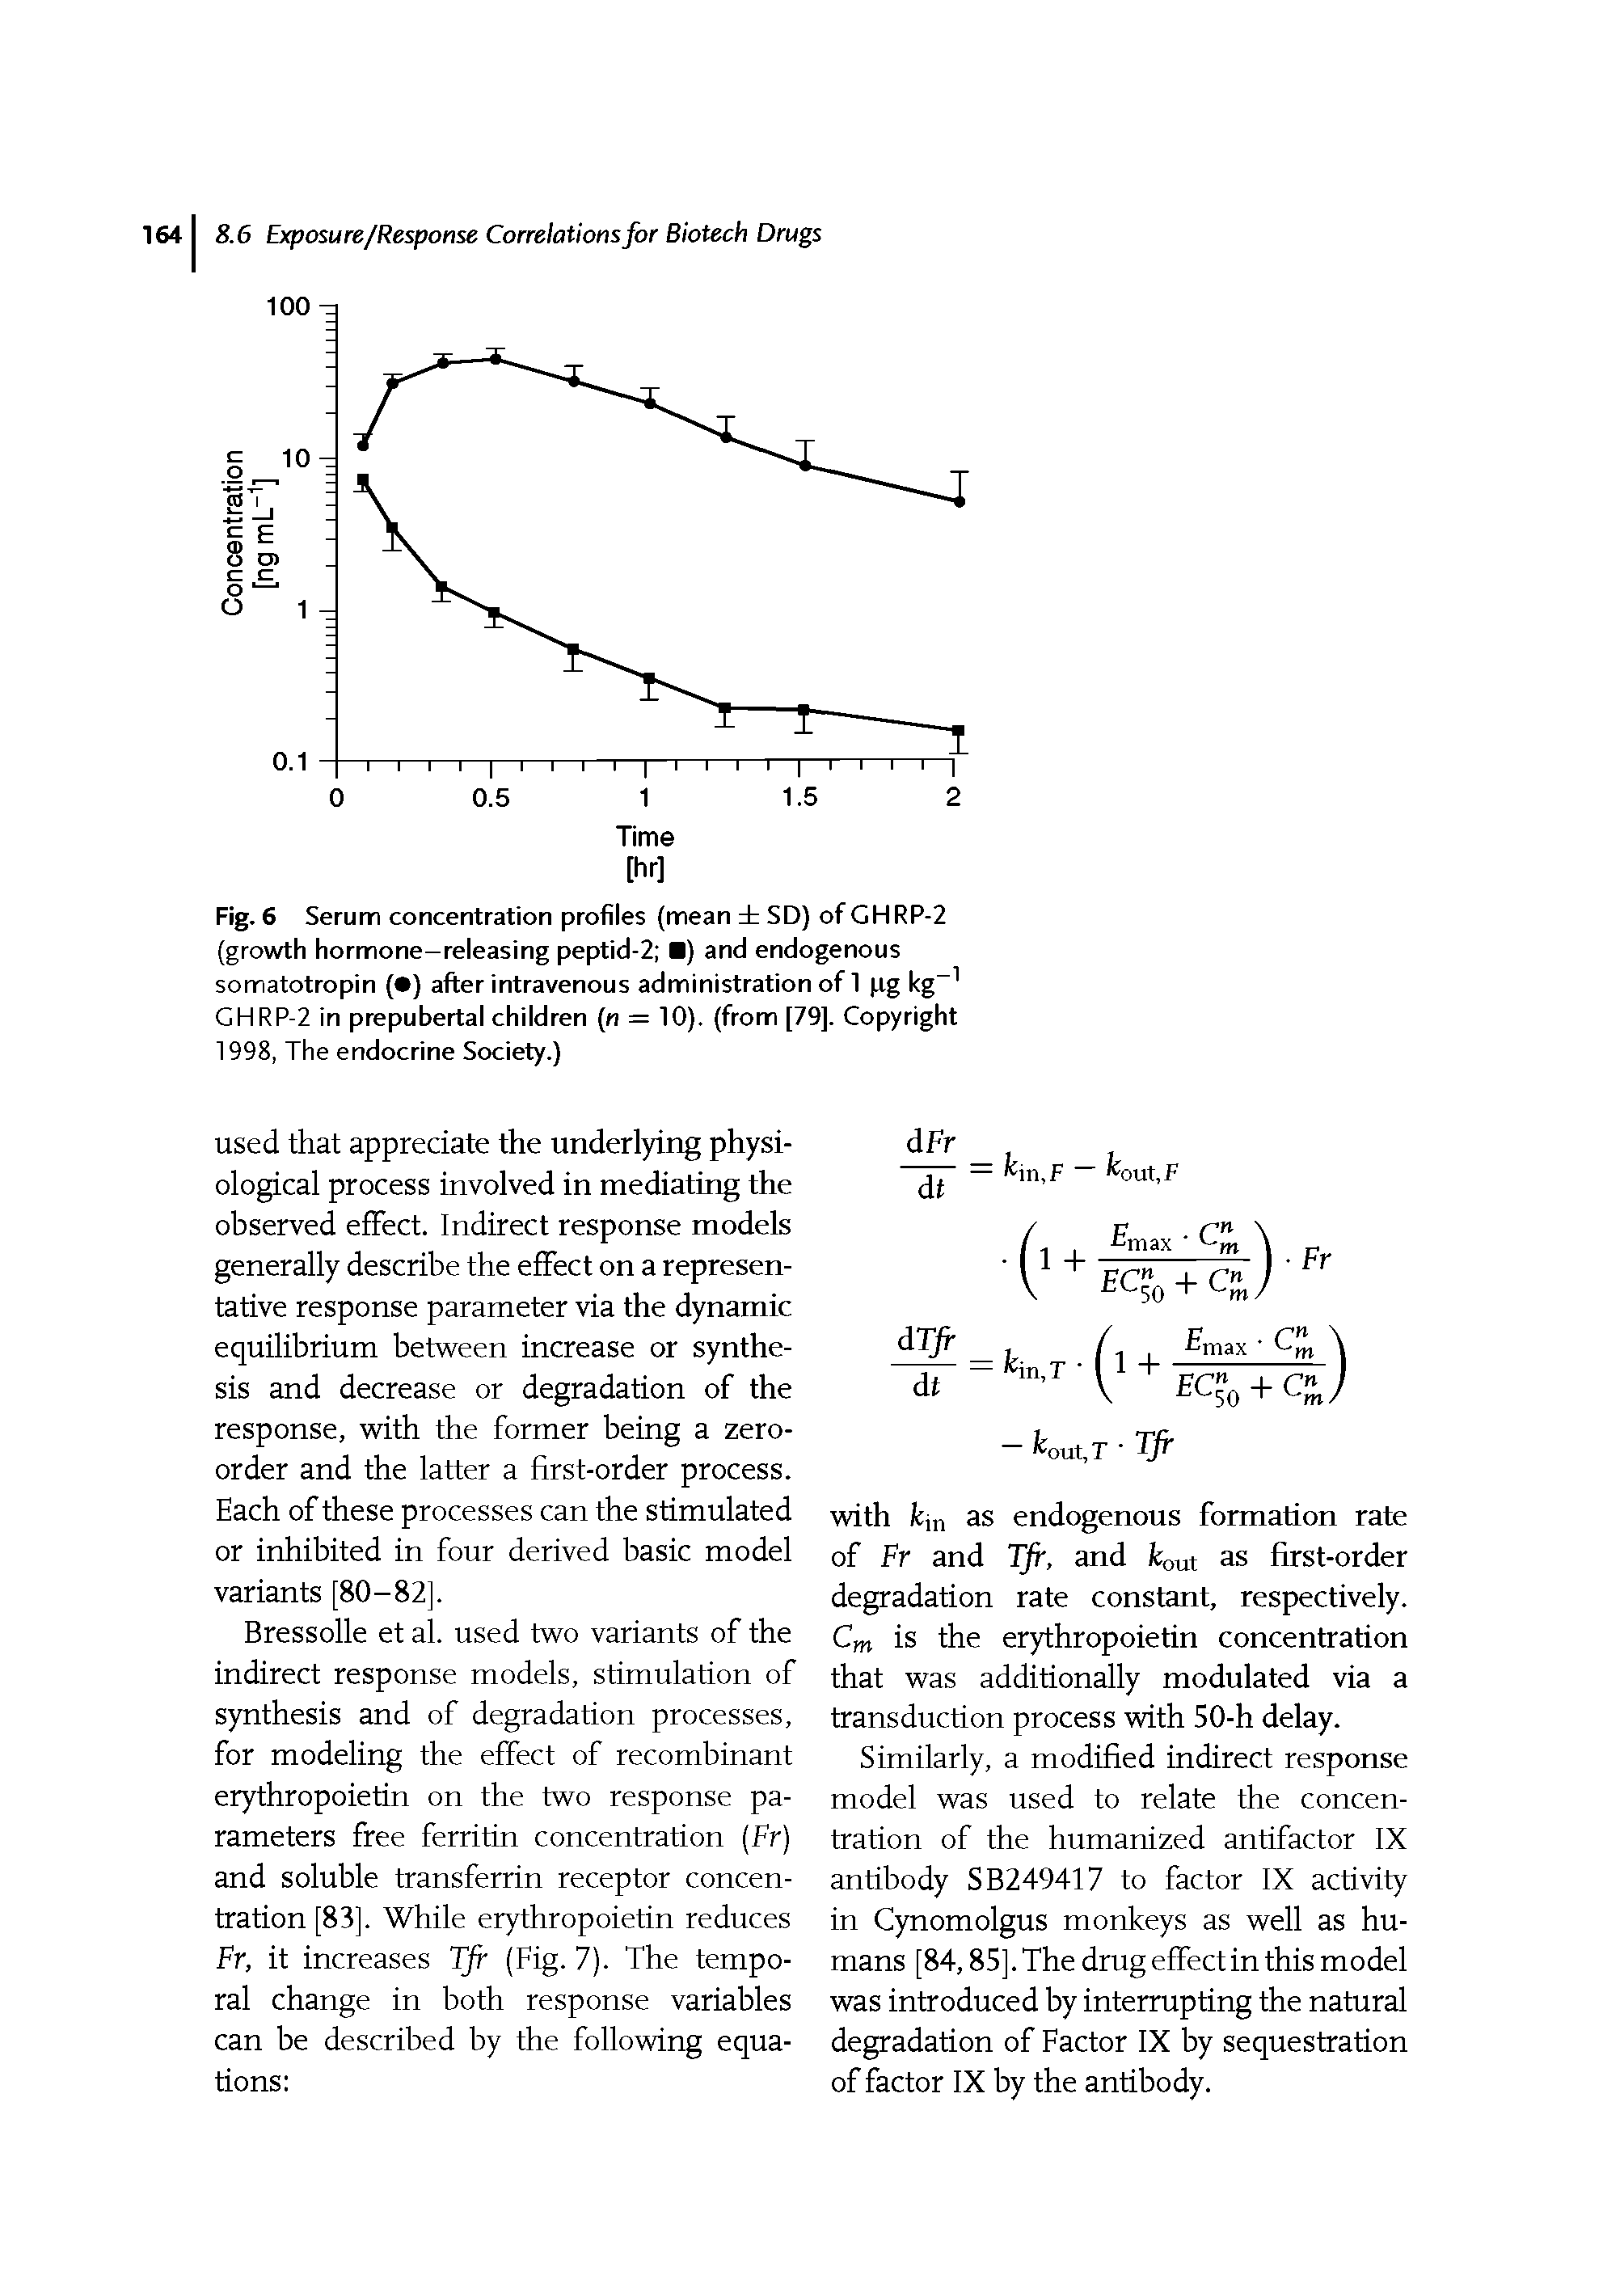 Fig. 6 Serum concentration profiles (mean SD) of GHRP-2 (growth hormone-releasing peptid-2 ) and endogenous somatotropin ( ) after intravenous administration of 1 pg kg GHRP-2 in prepubertal children (n = 10). (from [79]. Copyright 1998, The endocrine Society.)...